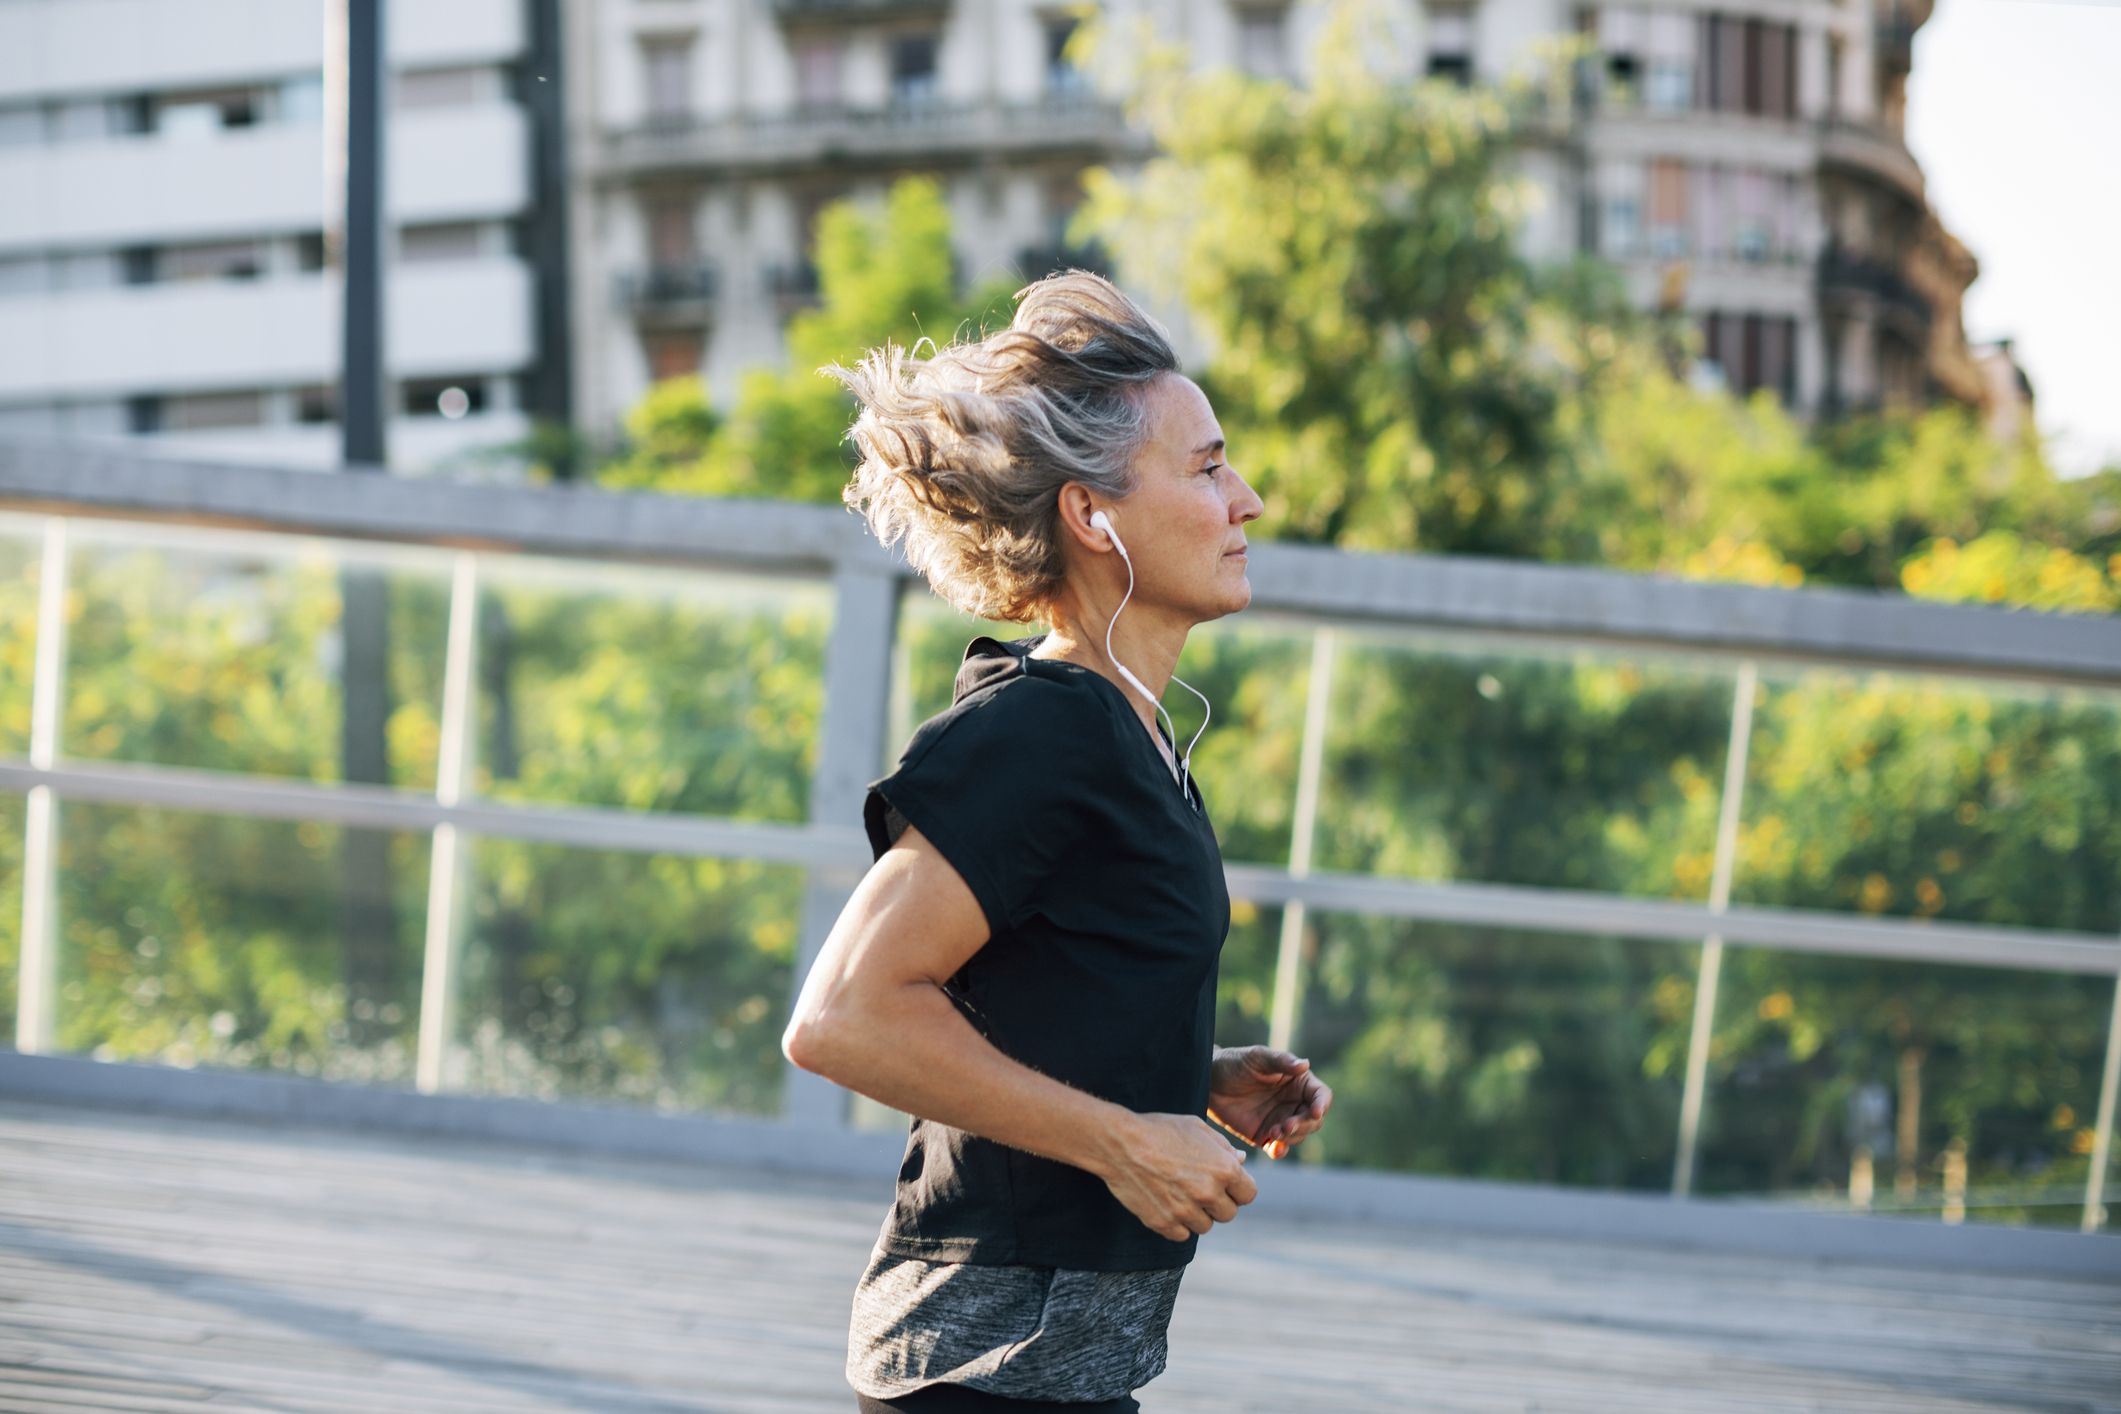 https://hips.hearstapps.com/hmg-prod/images/side-view-of-woman-jogging-while-listening-music-at-royalty-free-image-1571950133.jpg